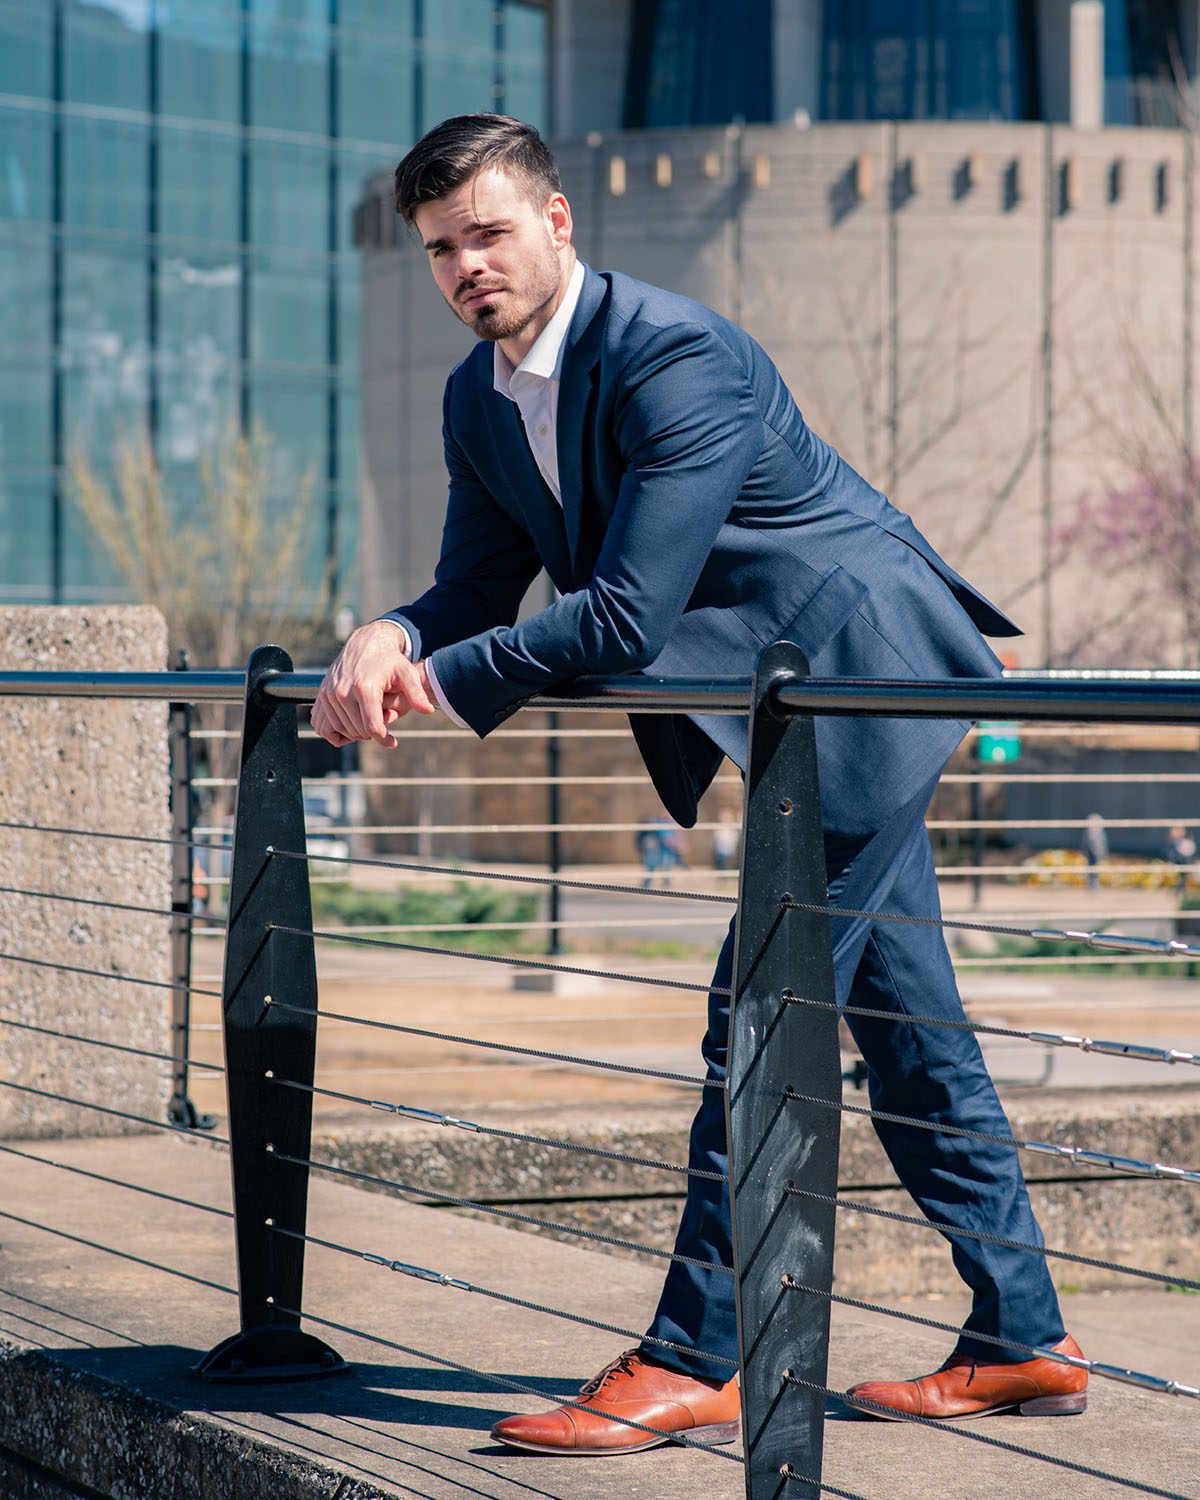 Joshua Nunley in a suit leaning on the fence